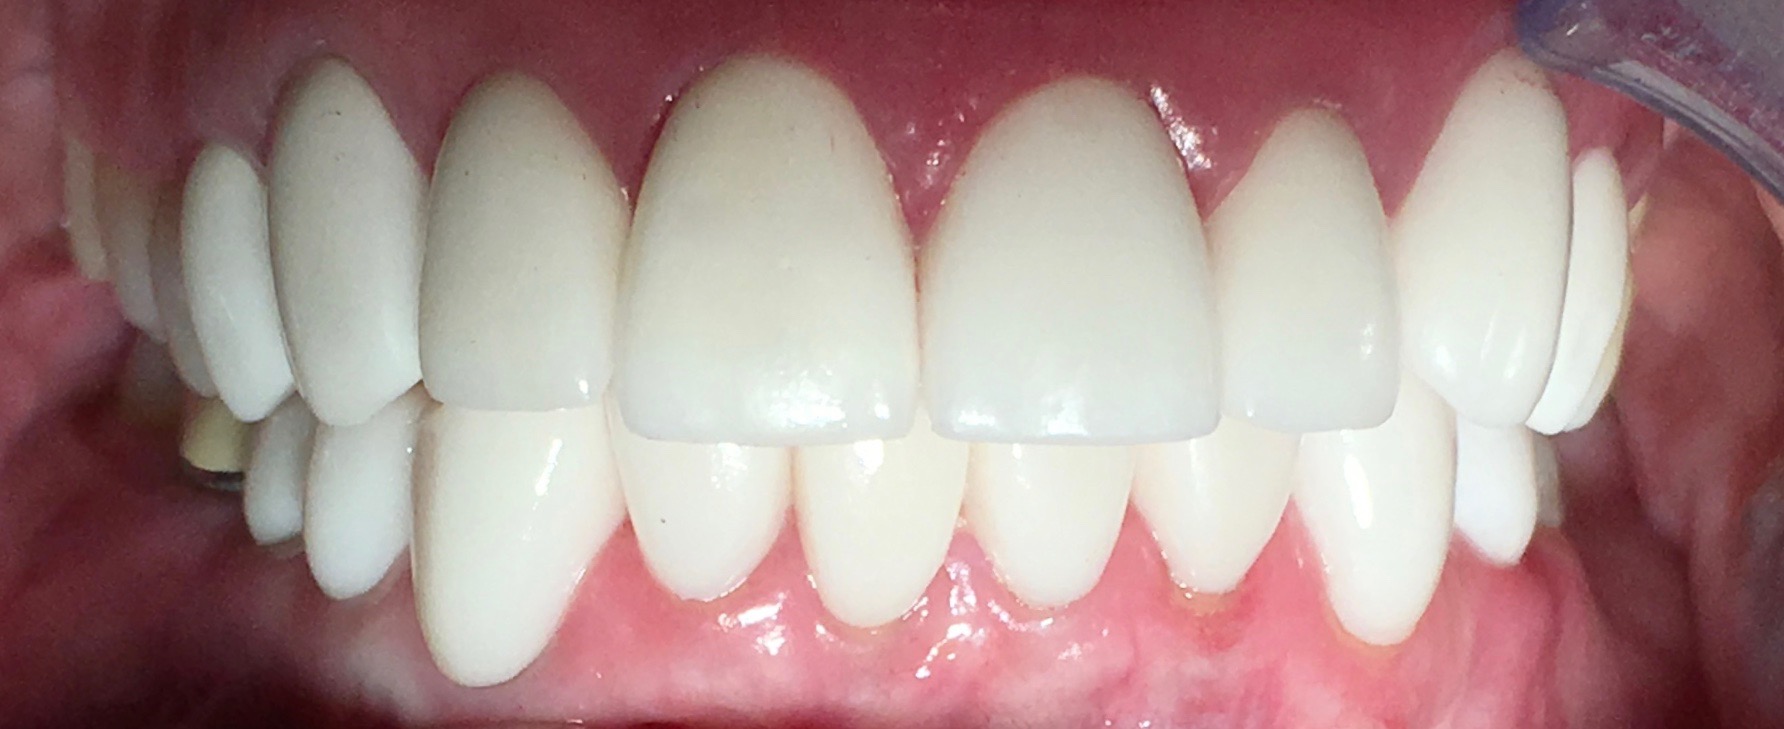 AFTER | Cosmetic veneers and crowns